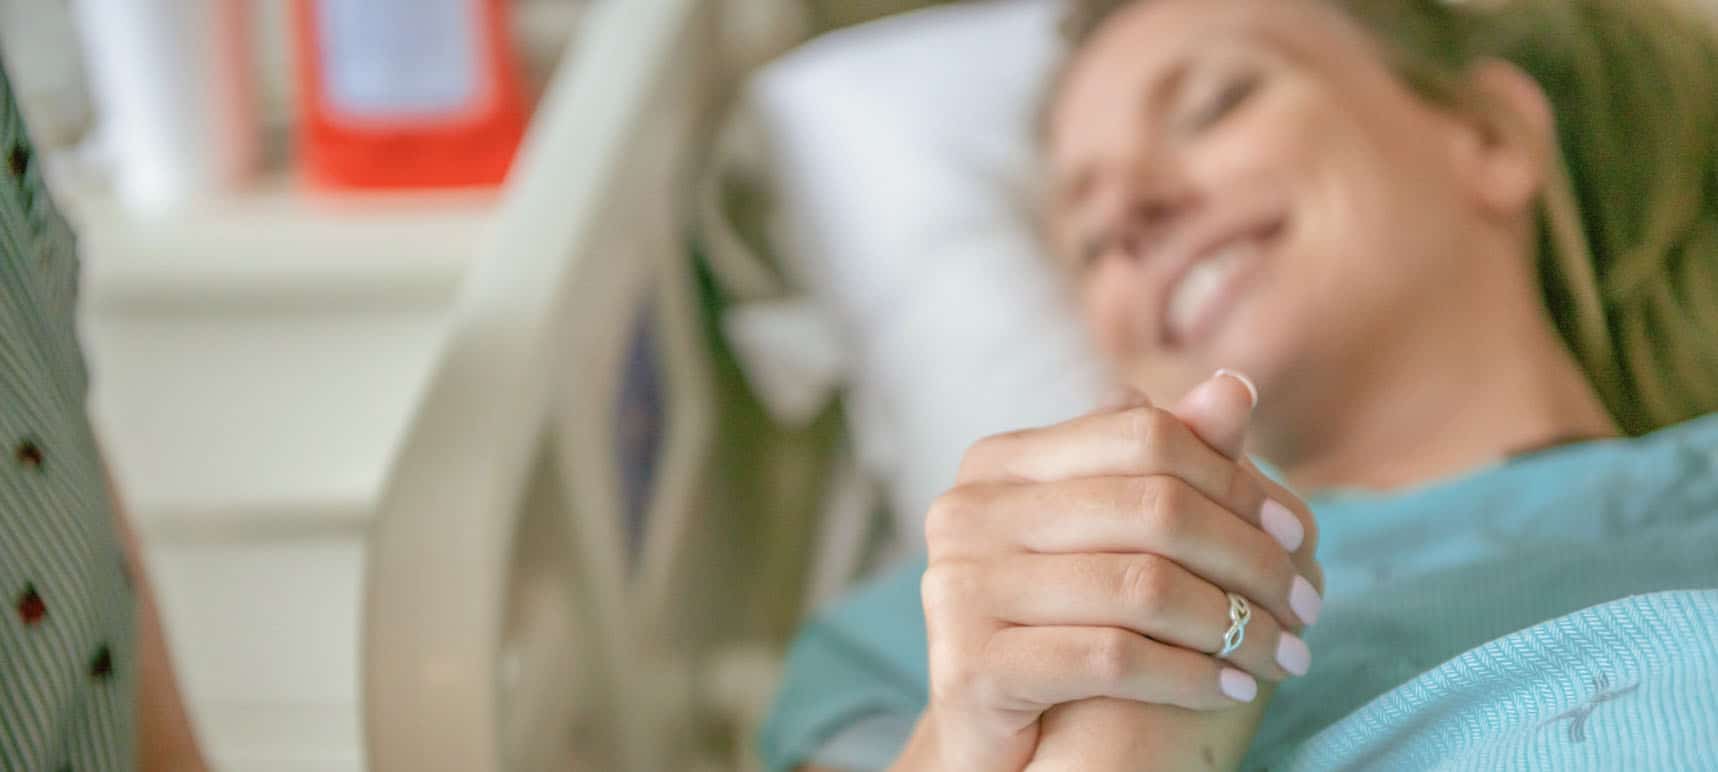 a pregnant woman lying in a hospital bed, holding hands with her support person.